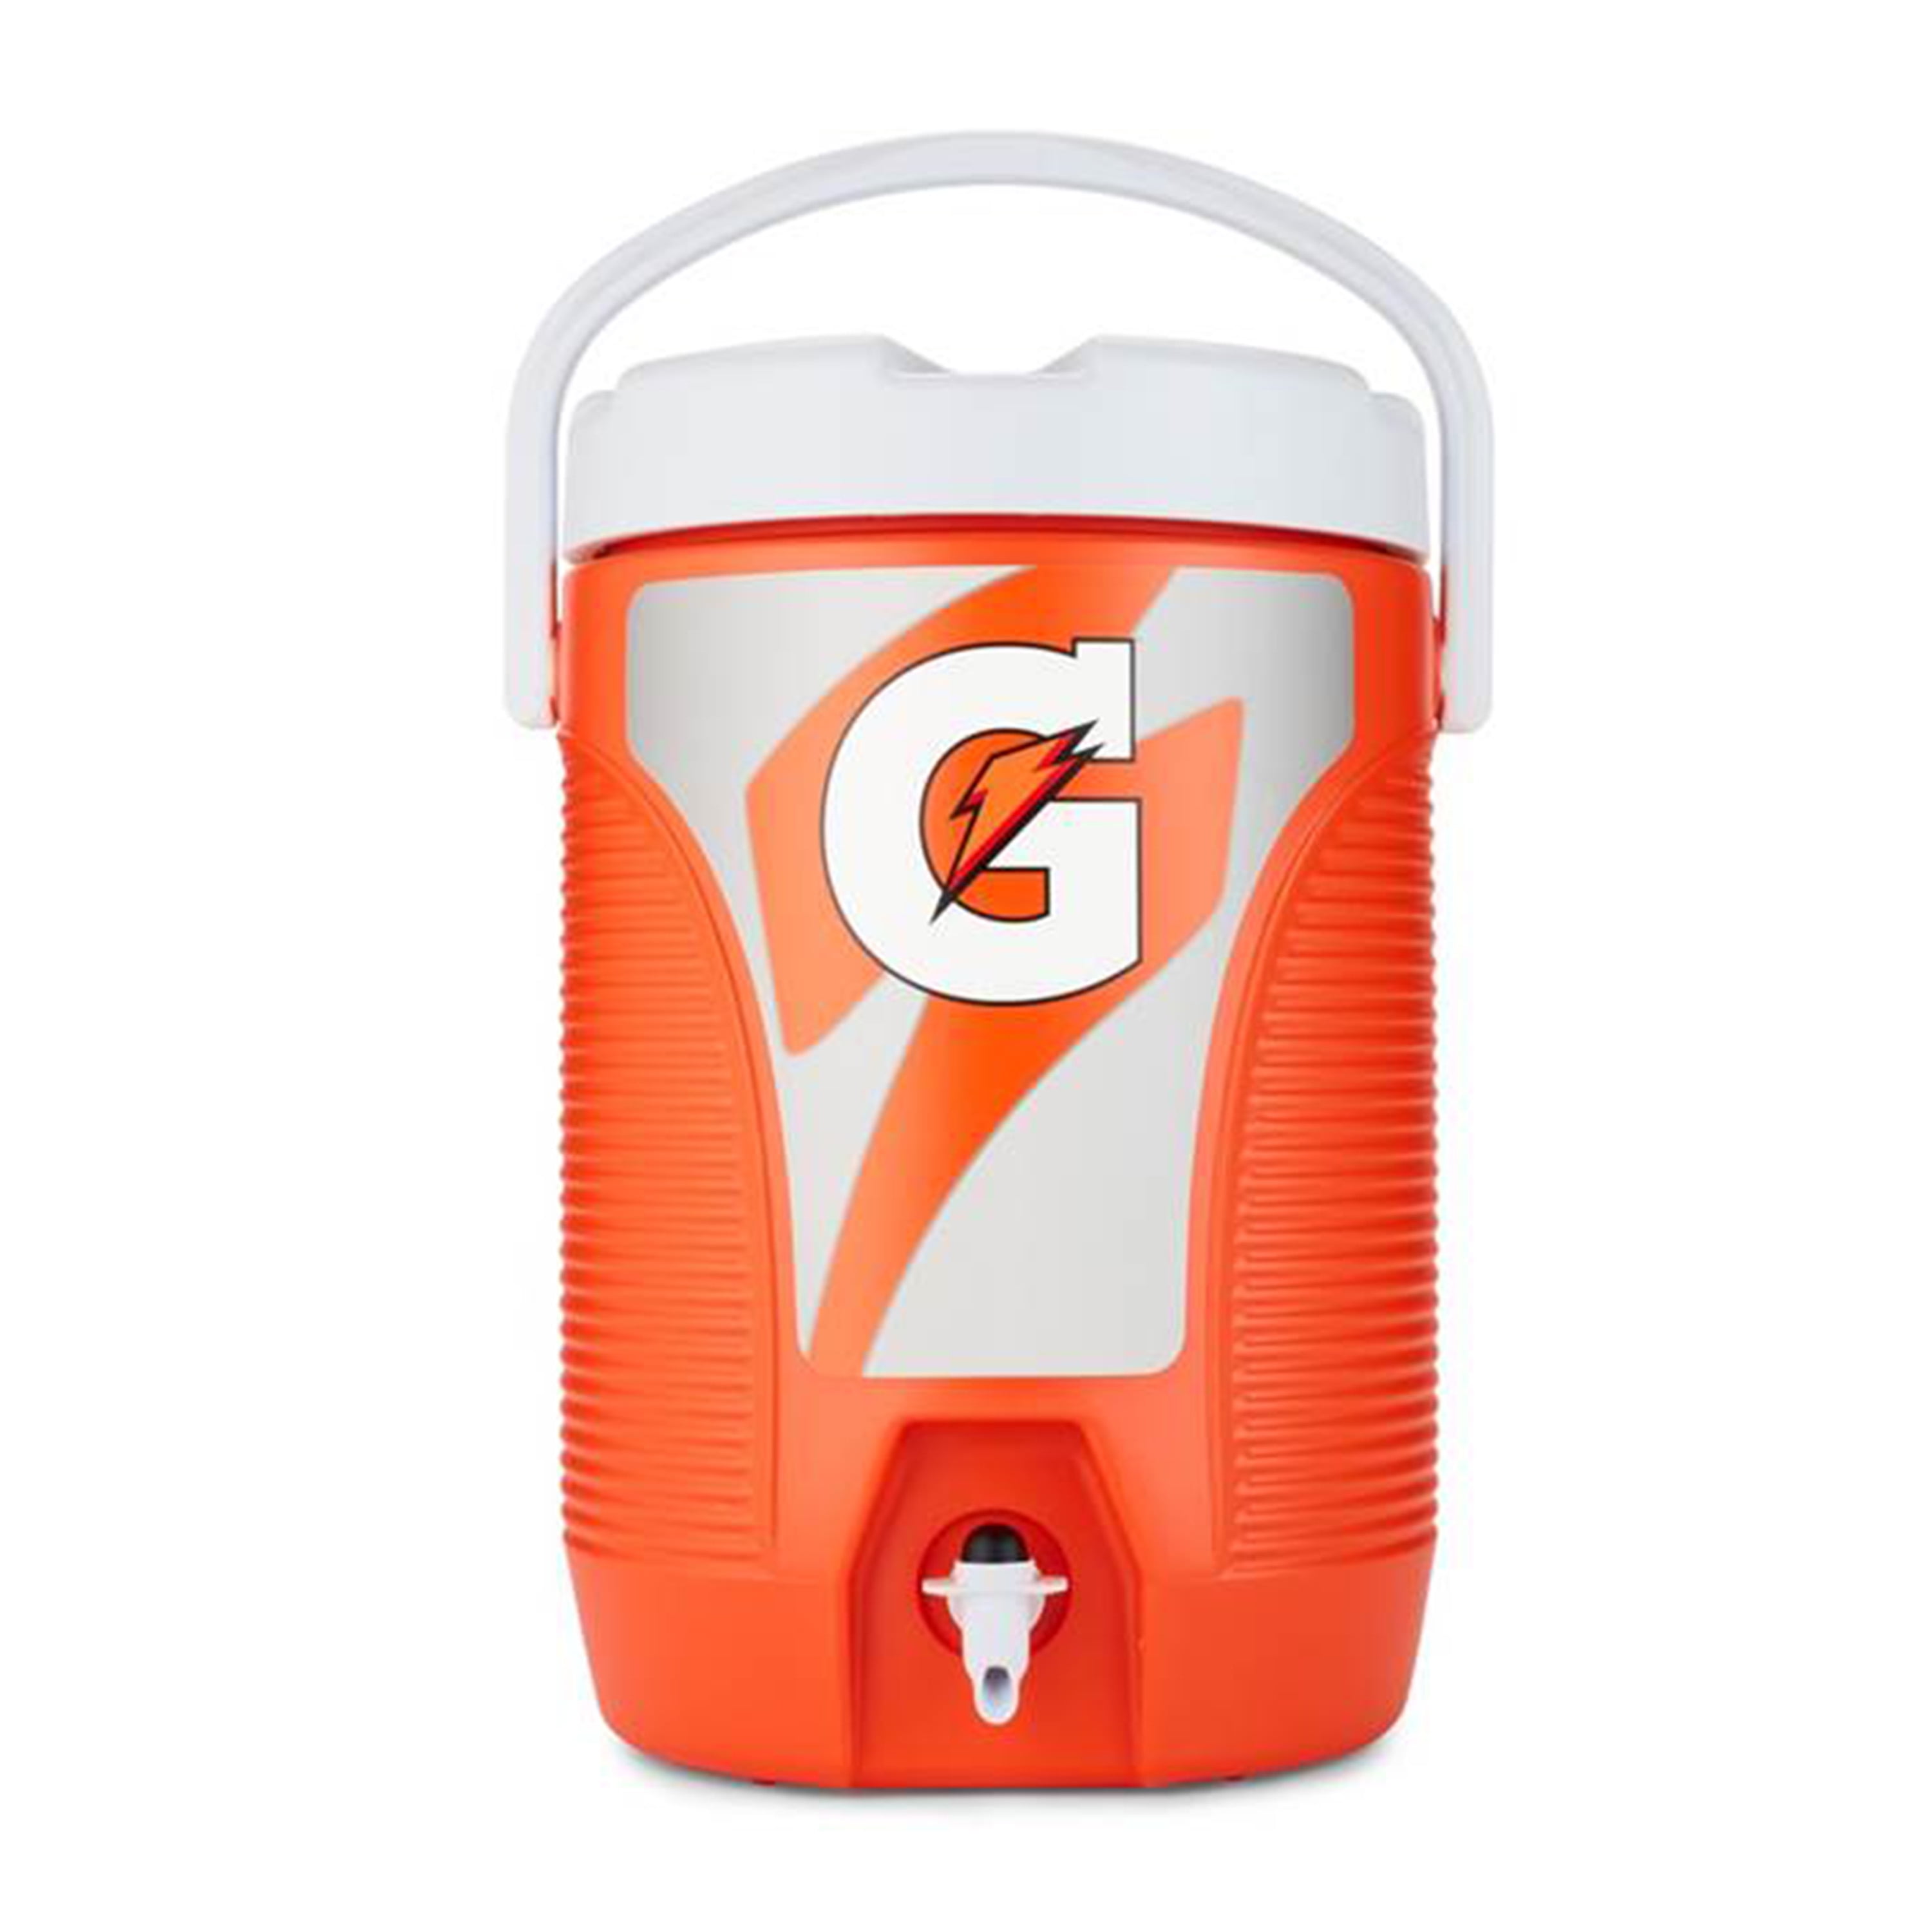 Igloo 5-gallon Heavy-duty Beverage Cooler Orange Sports Outdoor Portable for sale online 